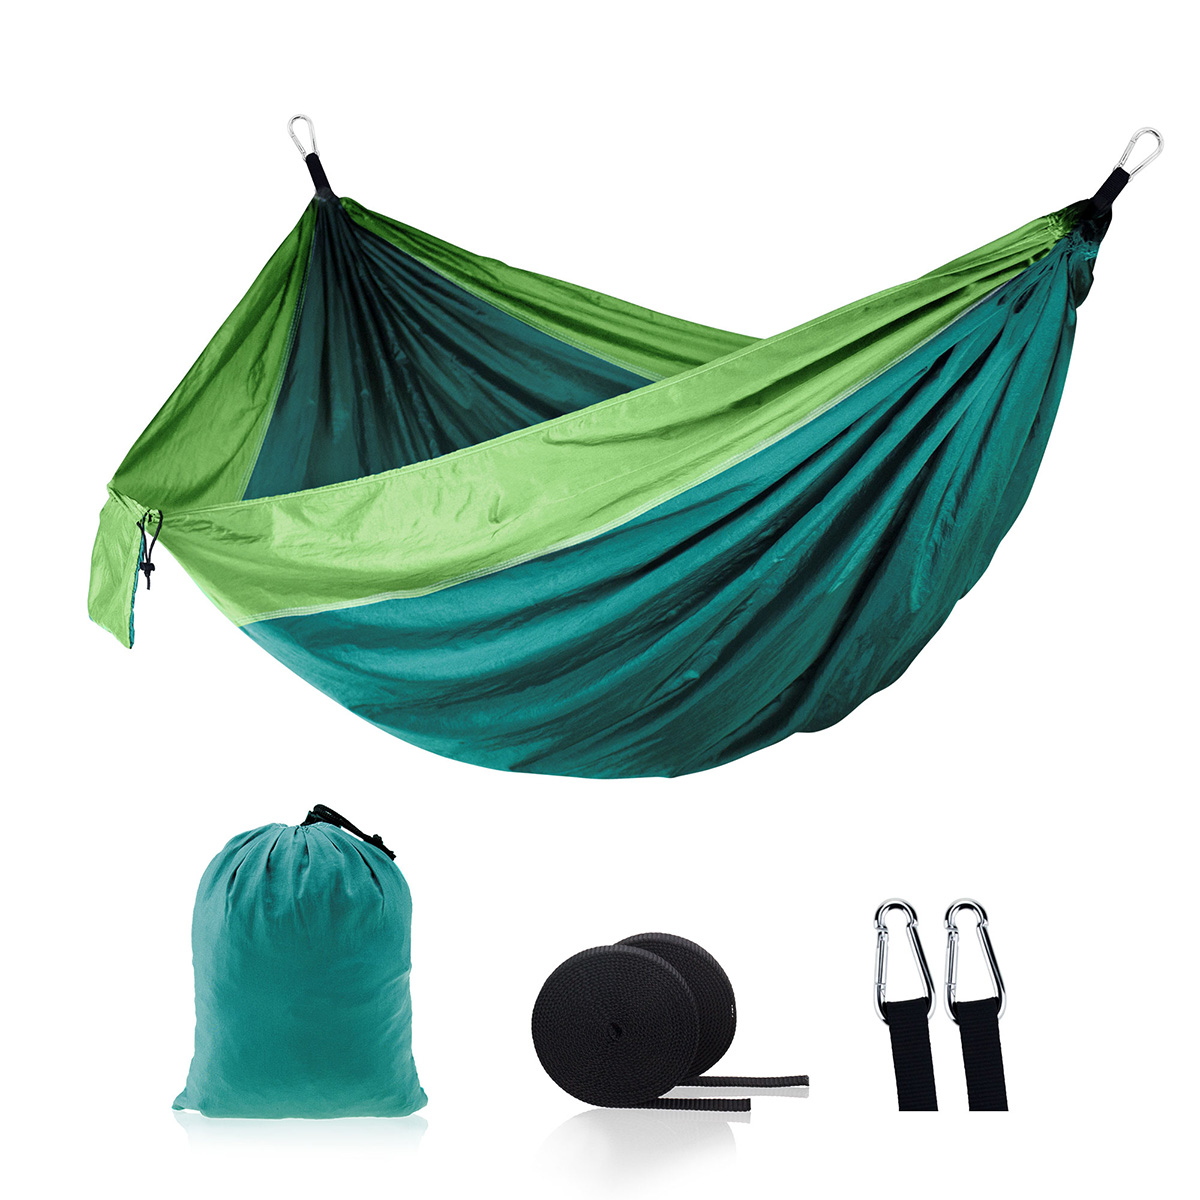 Camping Hammock,Portable 2 Person Double Hammock Nylon for Outdoor Camping Travel Hanging Bed Tent Garden Swing Set with Carrying Bag - image 1 of 5